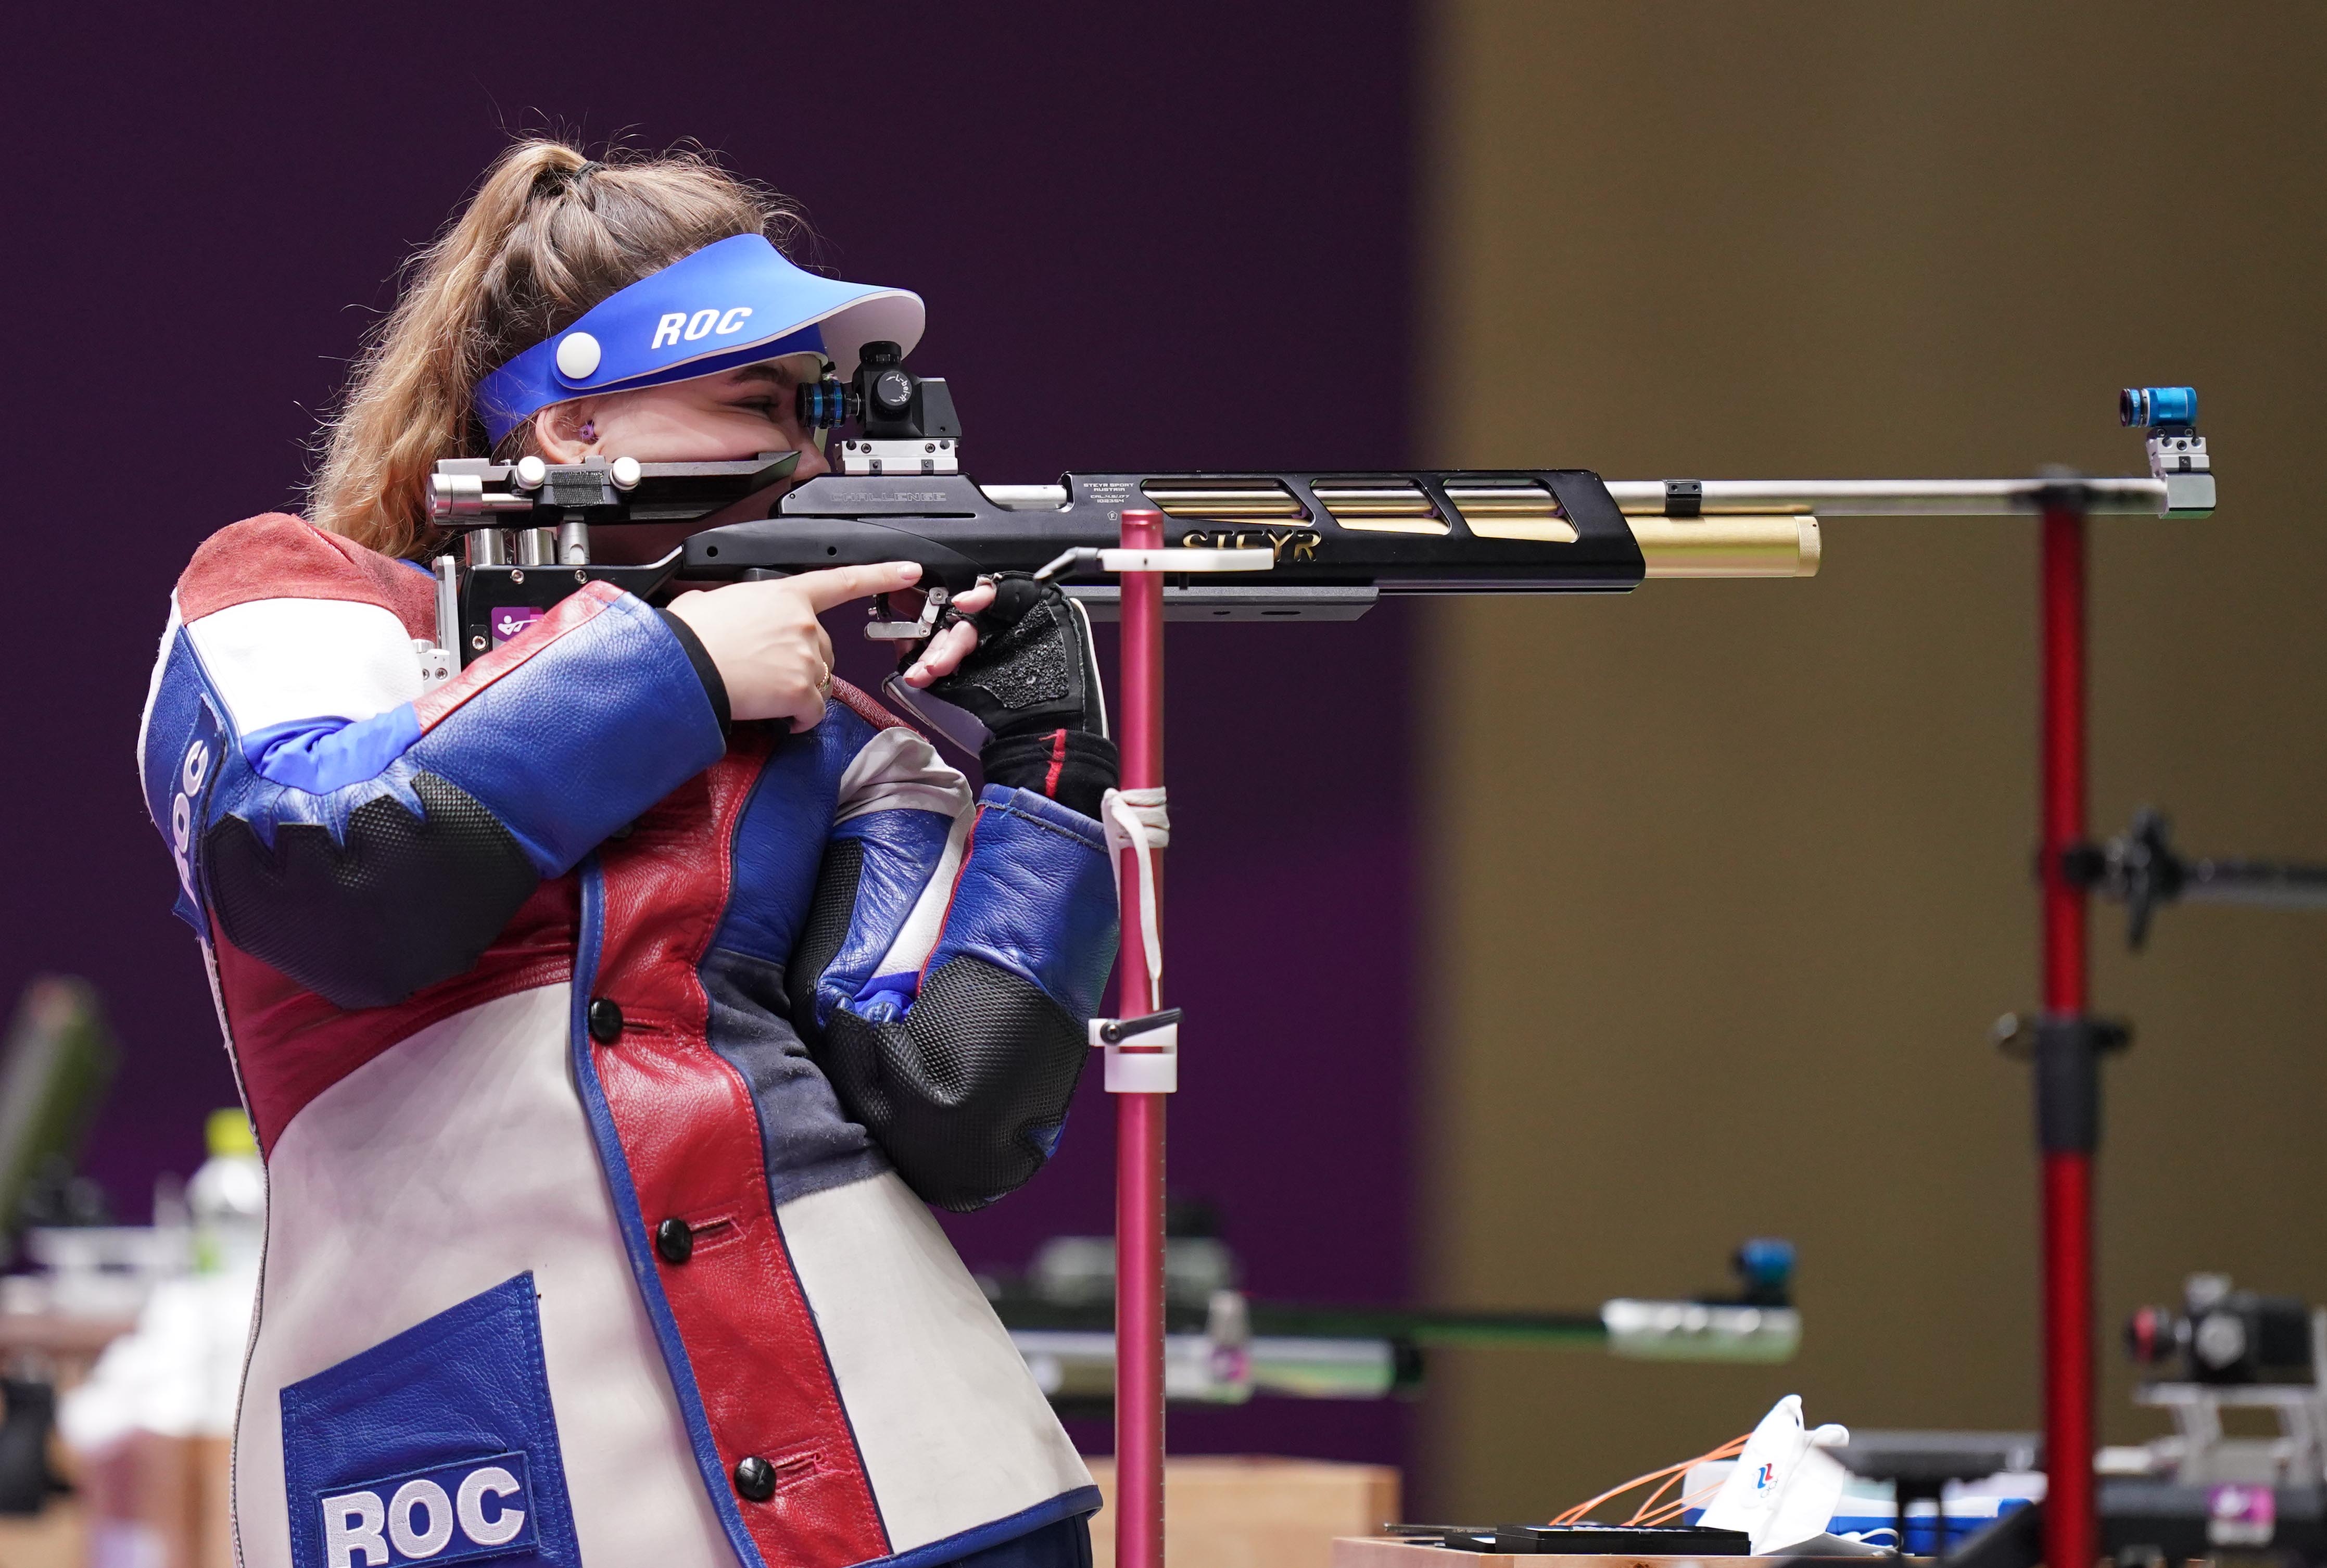 Anastasiia Galashina of Russian Olympic Committee (ROC) competes during the Tokyo 2020 women's 10m air rifle final in Tokyo, Japan, July 24, 2021.